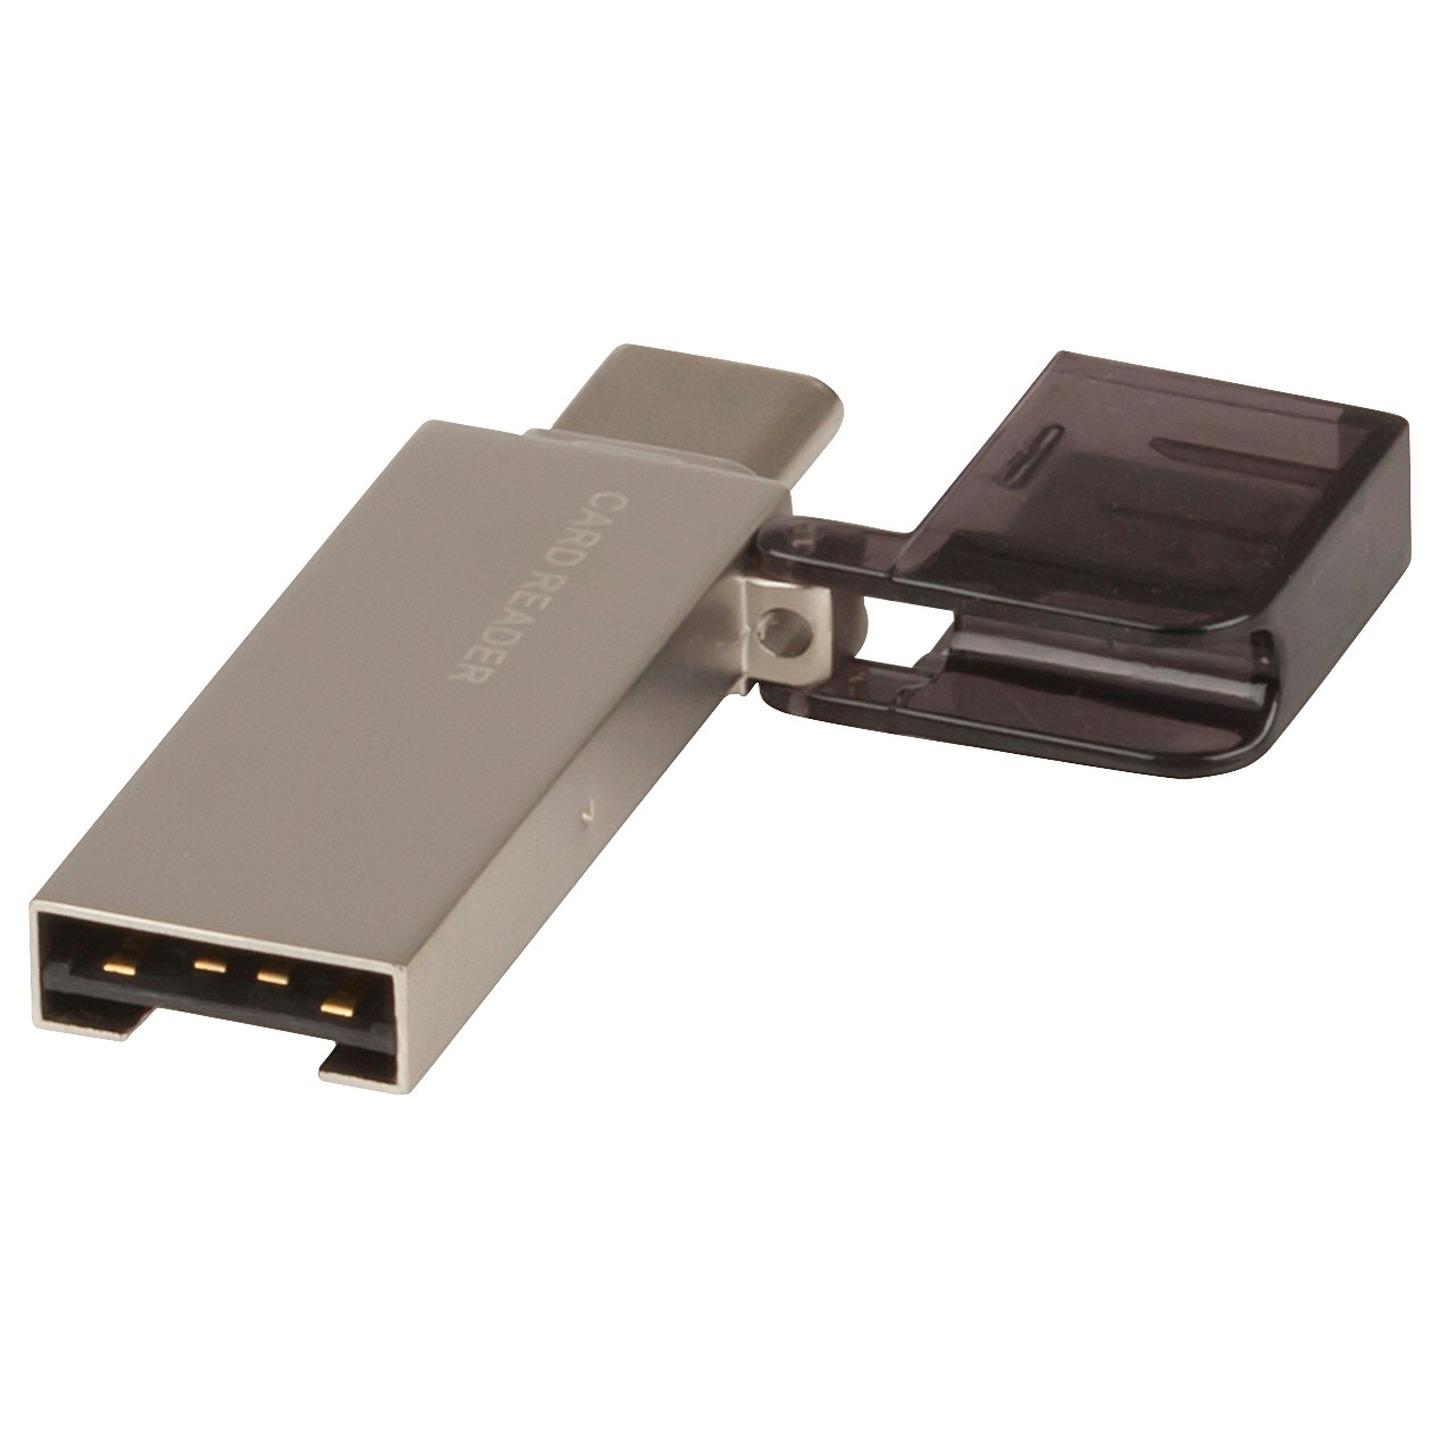 OTG Type-C USB Card Reader Suits Smartphones and Tablets with Type-C